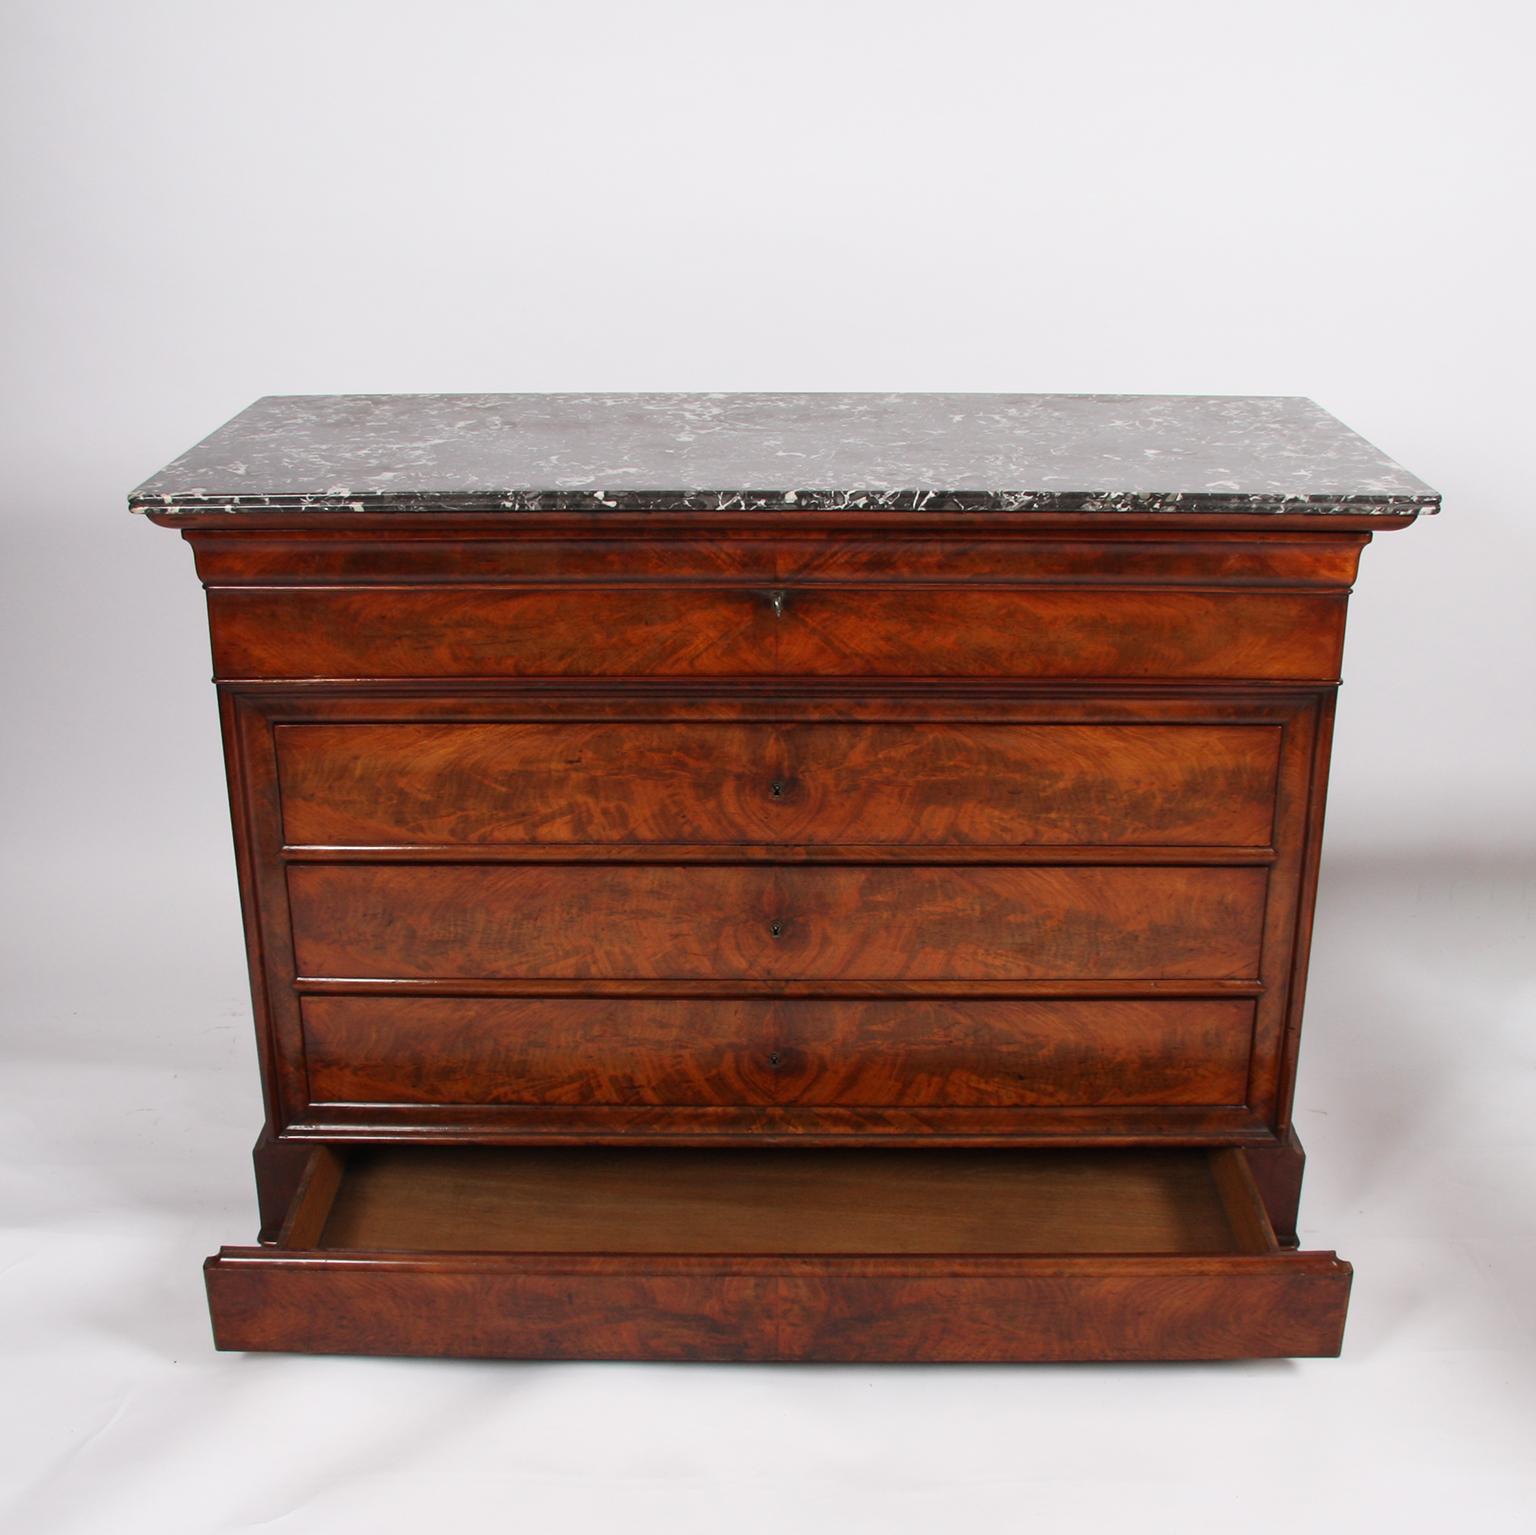 19th Century French Marble-Top Secretaire Chest with Leather Writing Surface 2